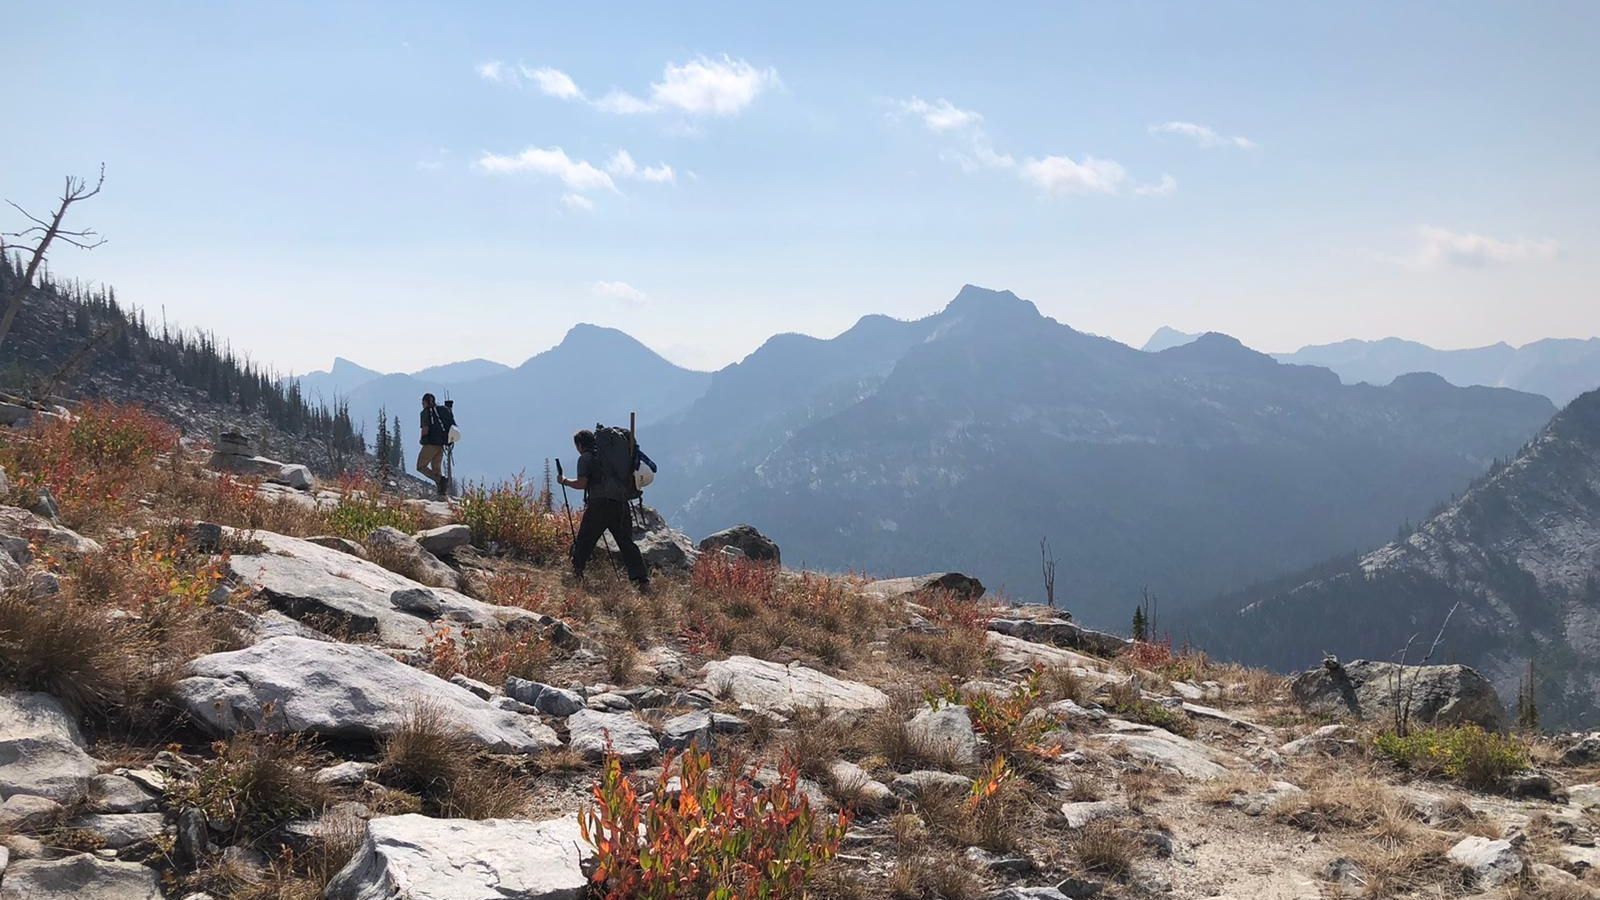 [Image Description: Two MCC members are walking away on a rocky trail, carrying their packs, surrounded by burnt orange bushes. Through the haze in the background, there are a multitude of mountains, overlapping one another.]